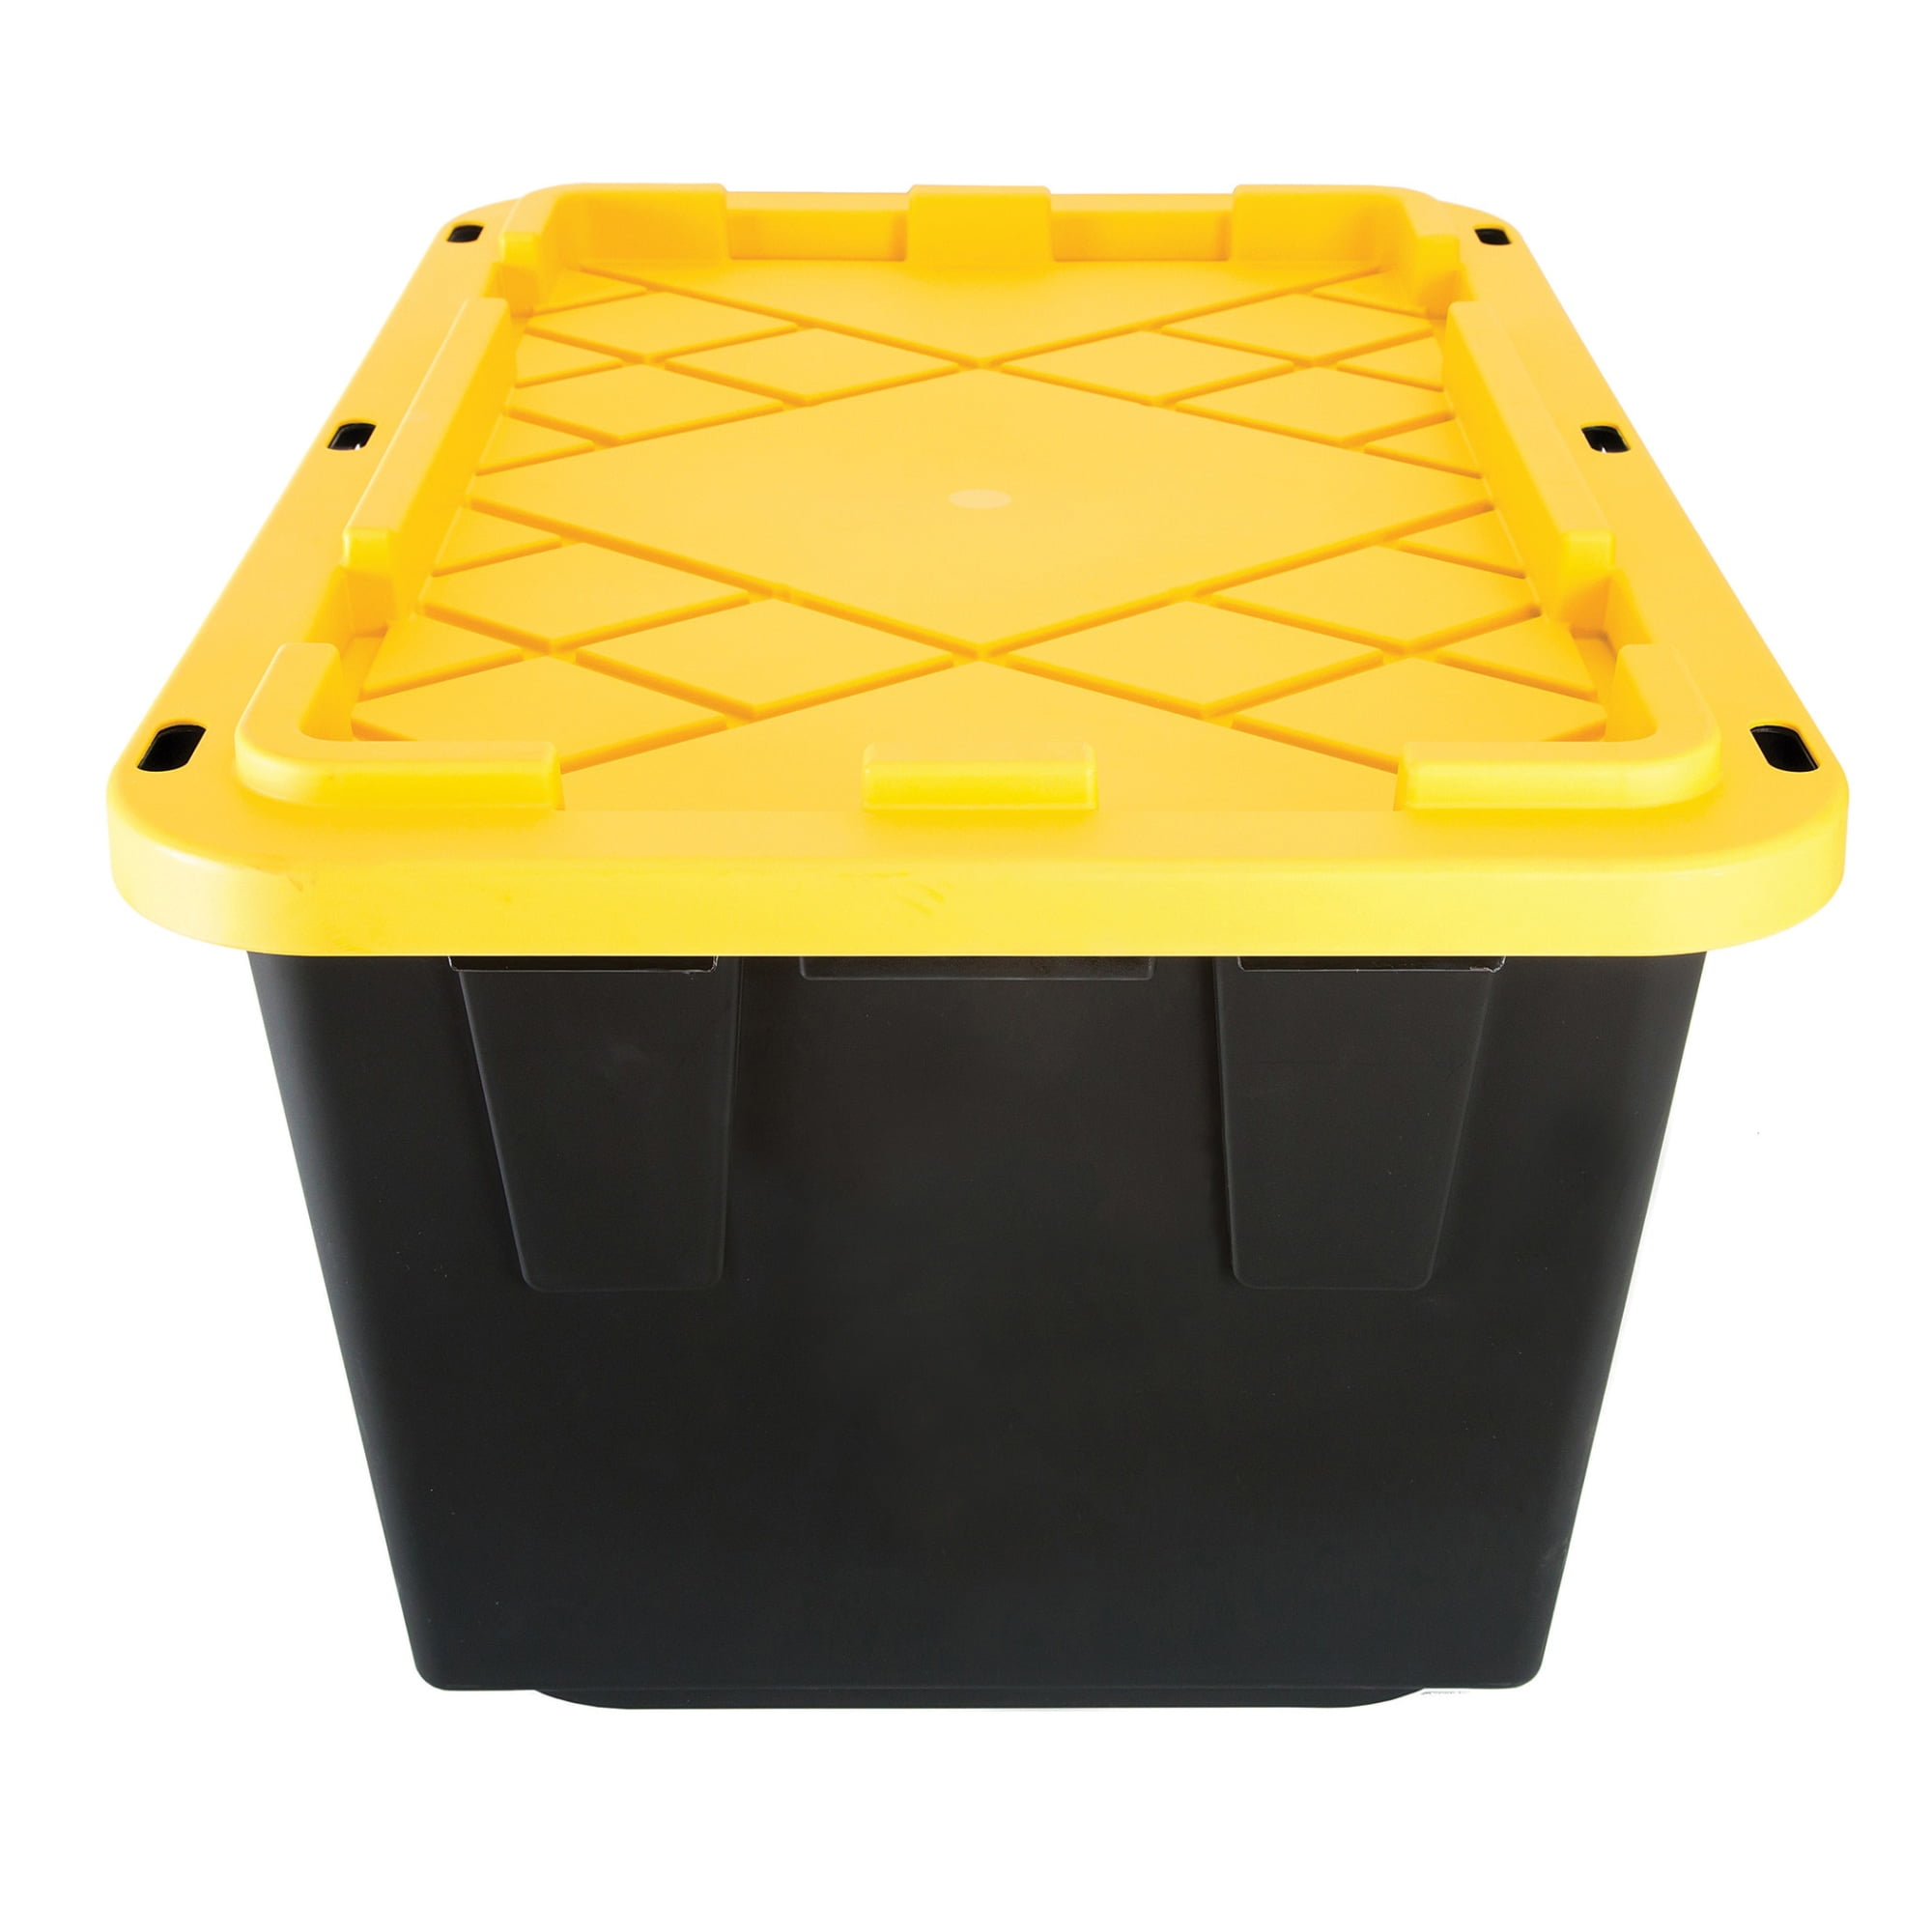 27 Gallon FOUR Details about   GreenmadeHeavy-Duty Plastic Bins Black and Yellow with Lids 4x 